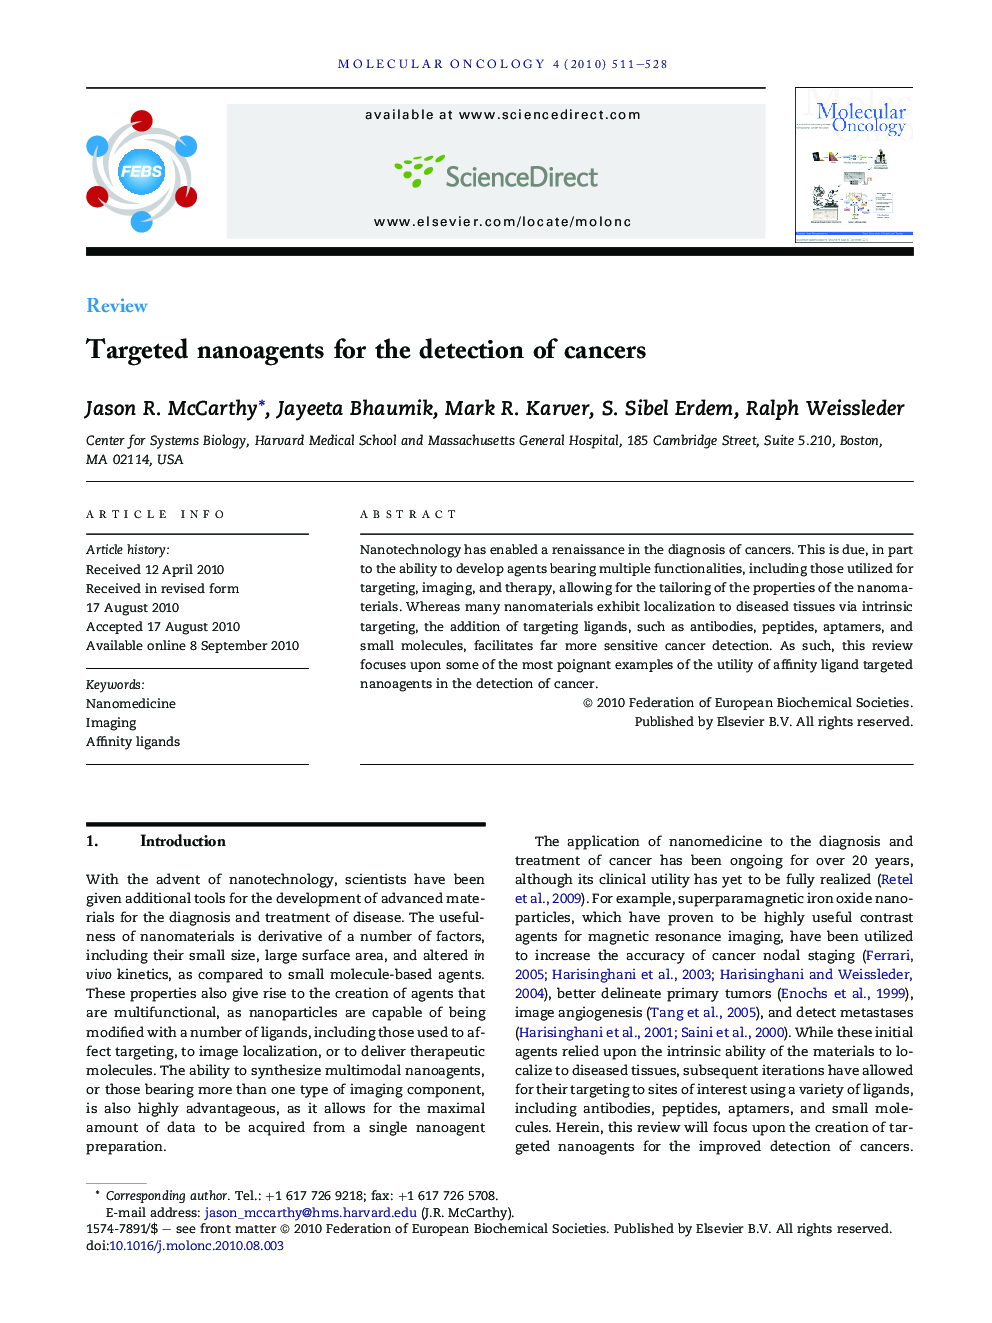 Targeted nanoagents for the detection of cancers